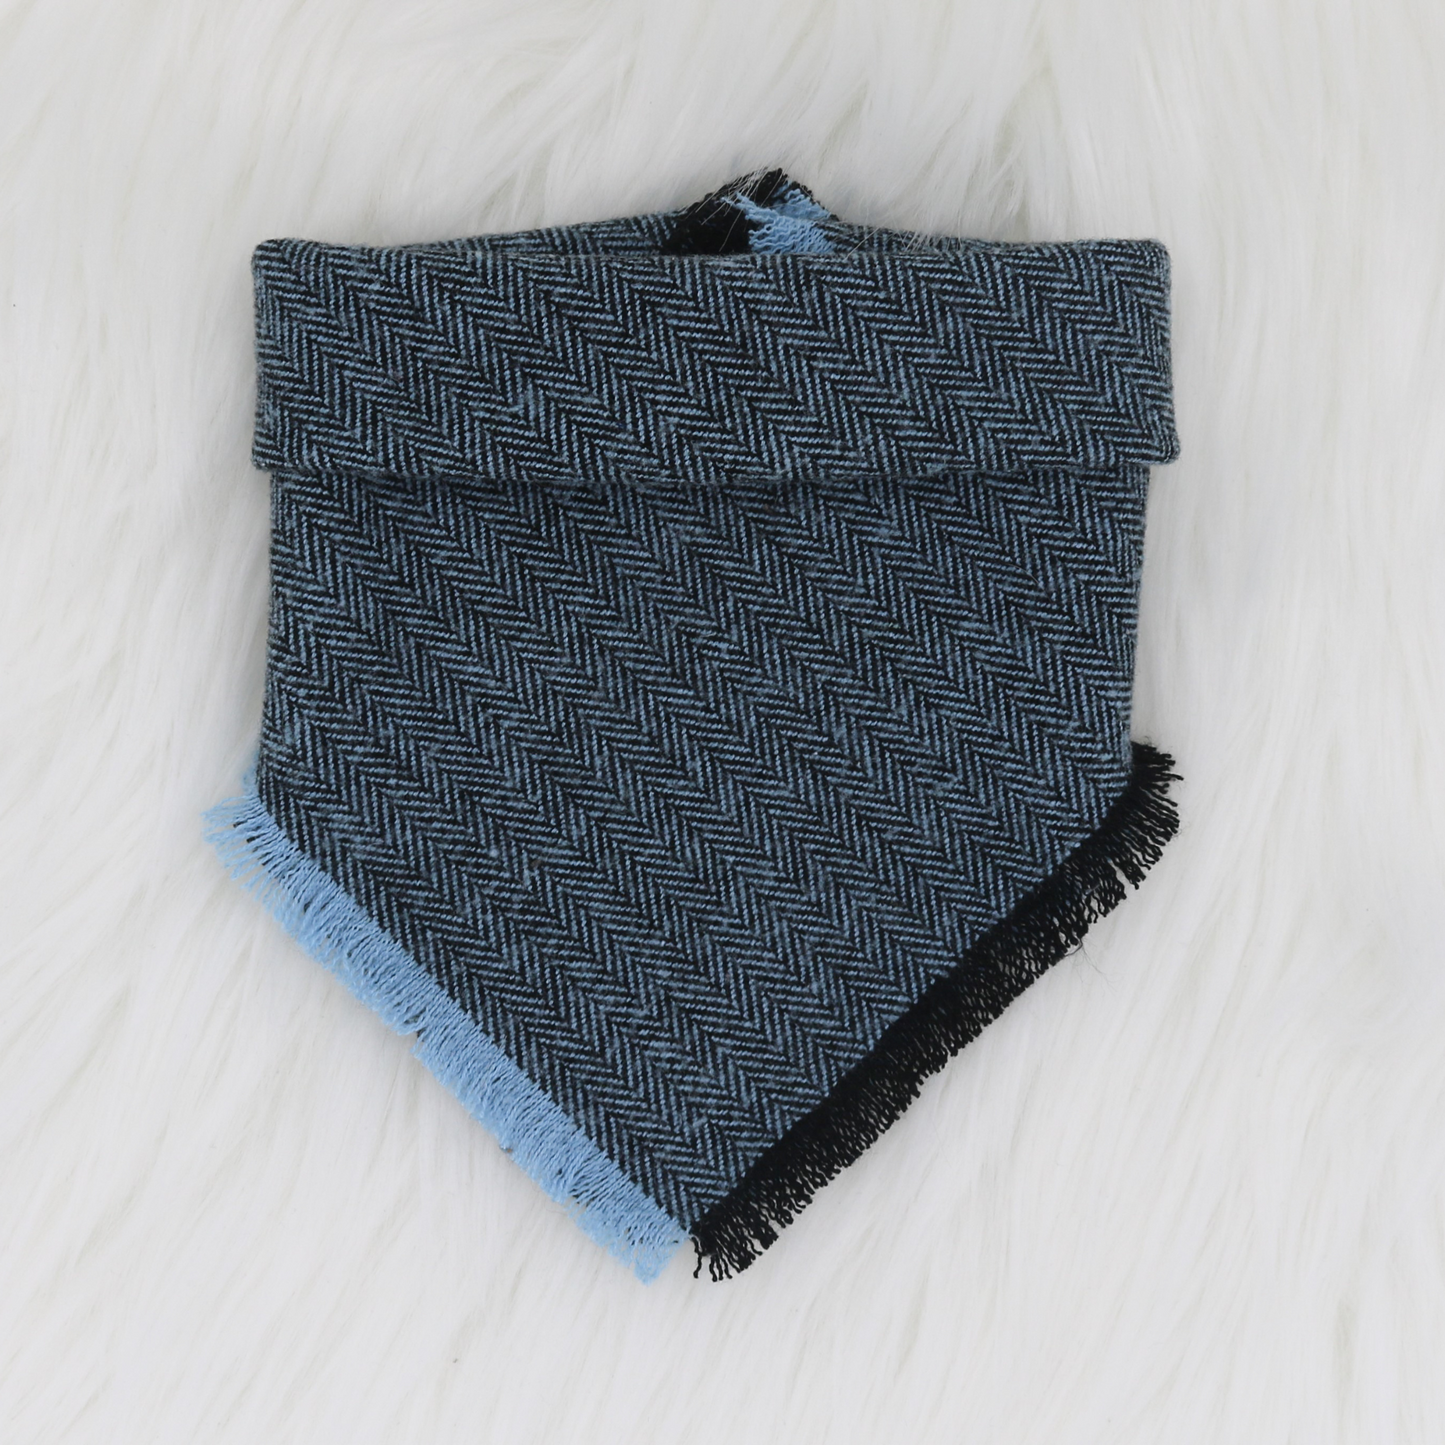 Snap on bandana in a frayed flannel style | Handmade by The Luminous Pets